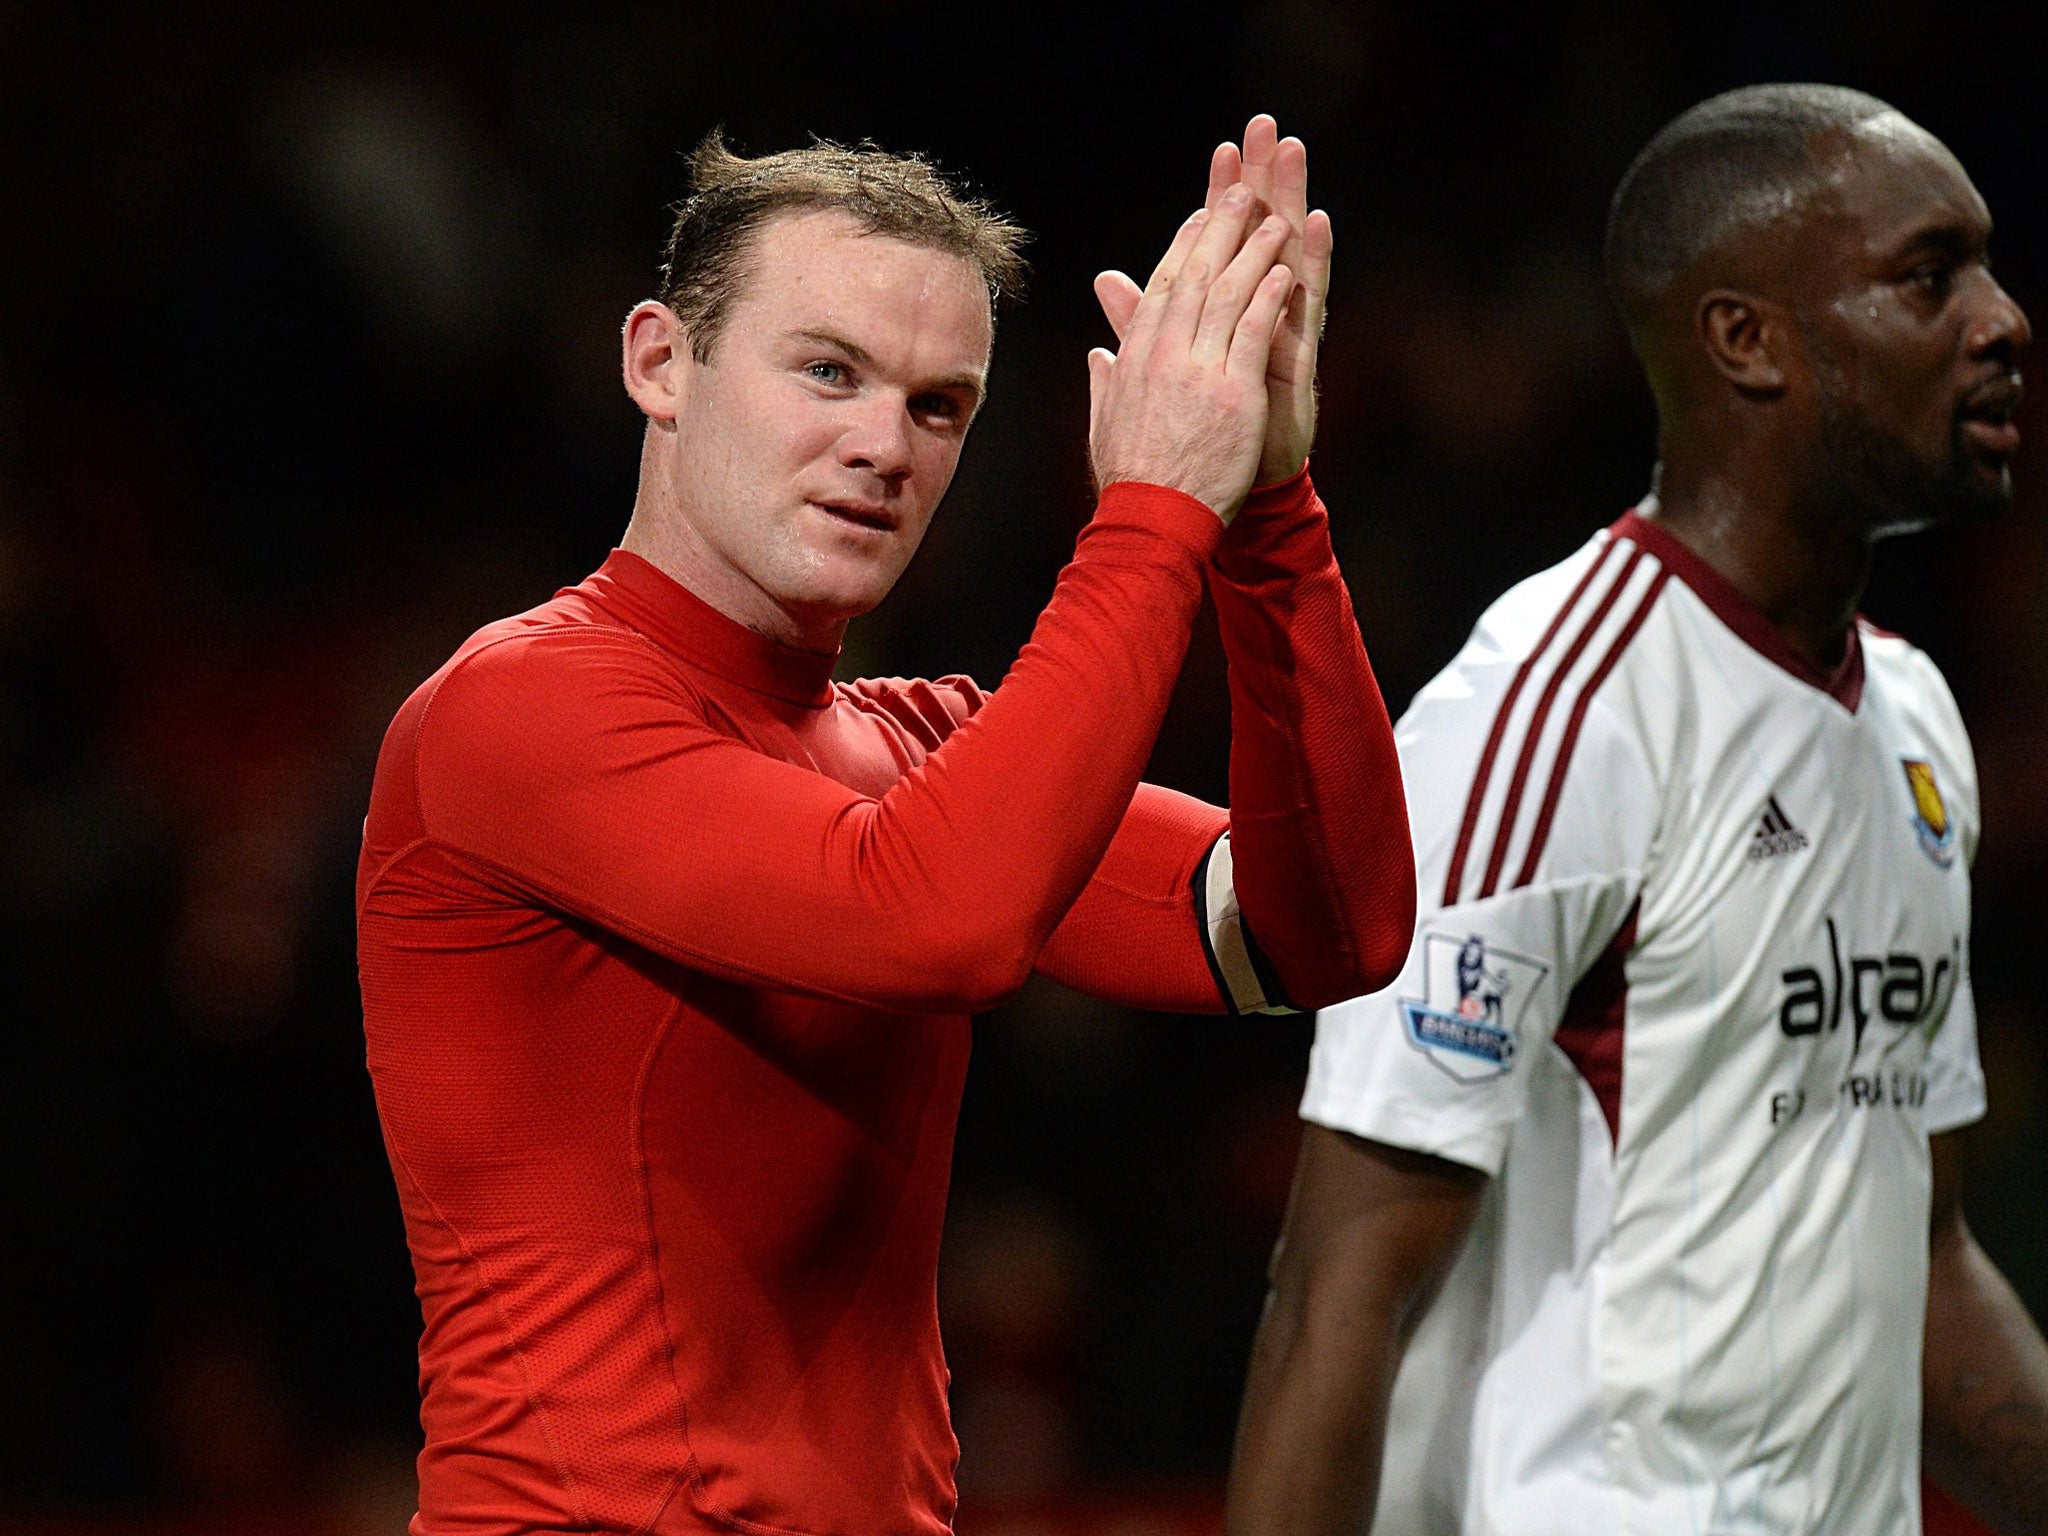 Wayne Rooney starts for Manchester United against Tottenham after overcoming a groin injury